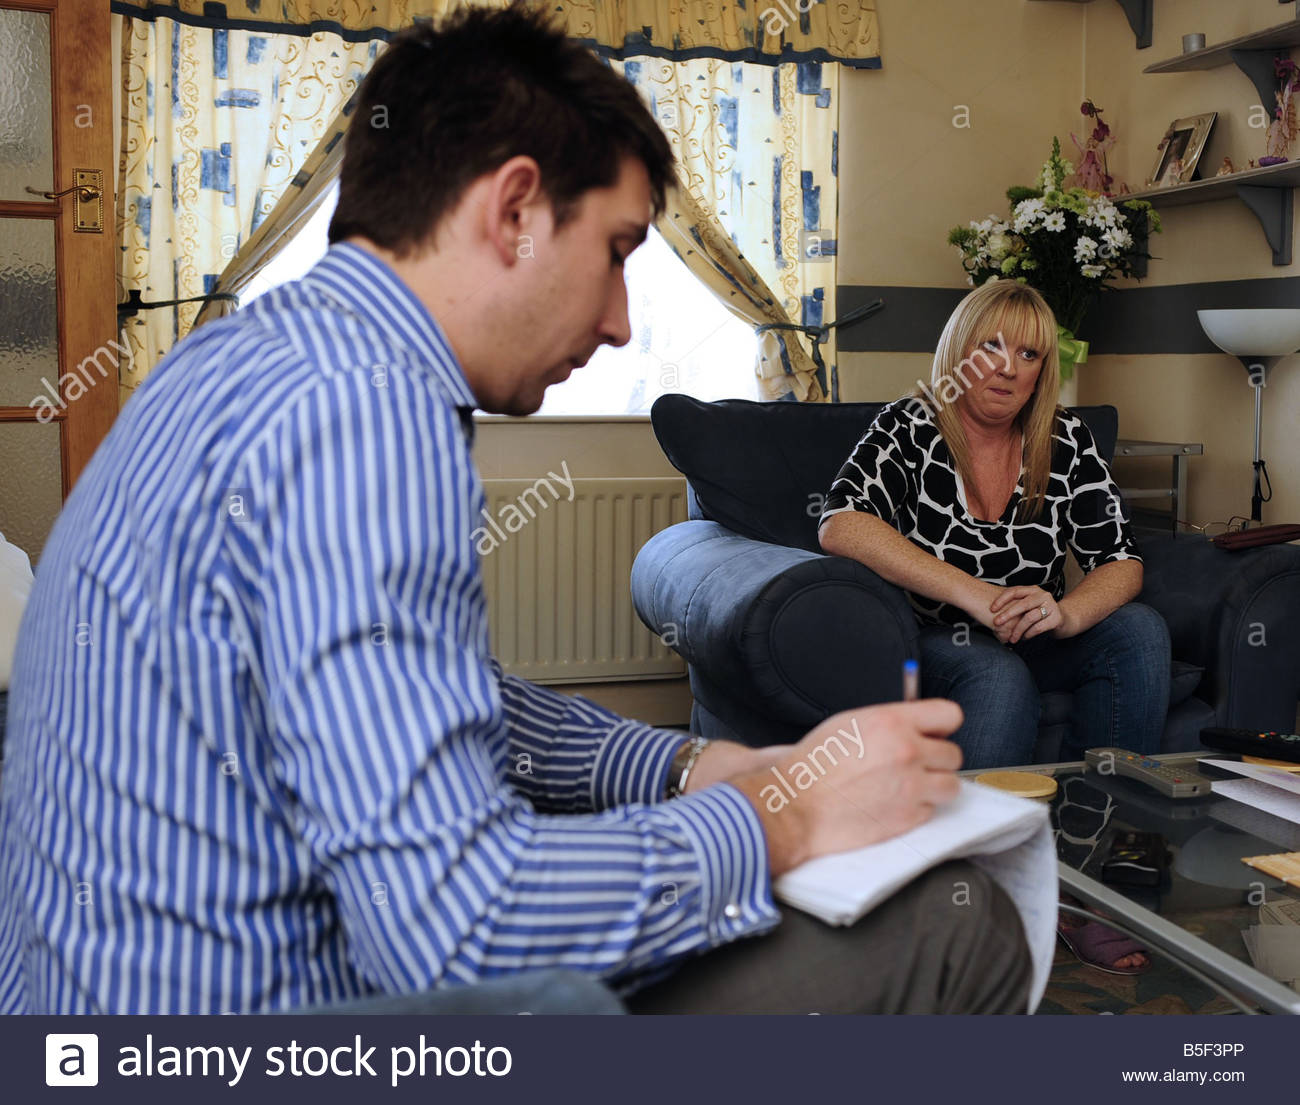 The Guilty Murderer Stock Photos & The Guilty Murderer Stock Images - Alamy